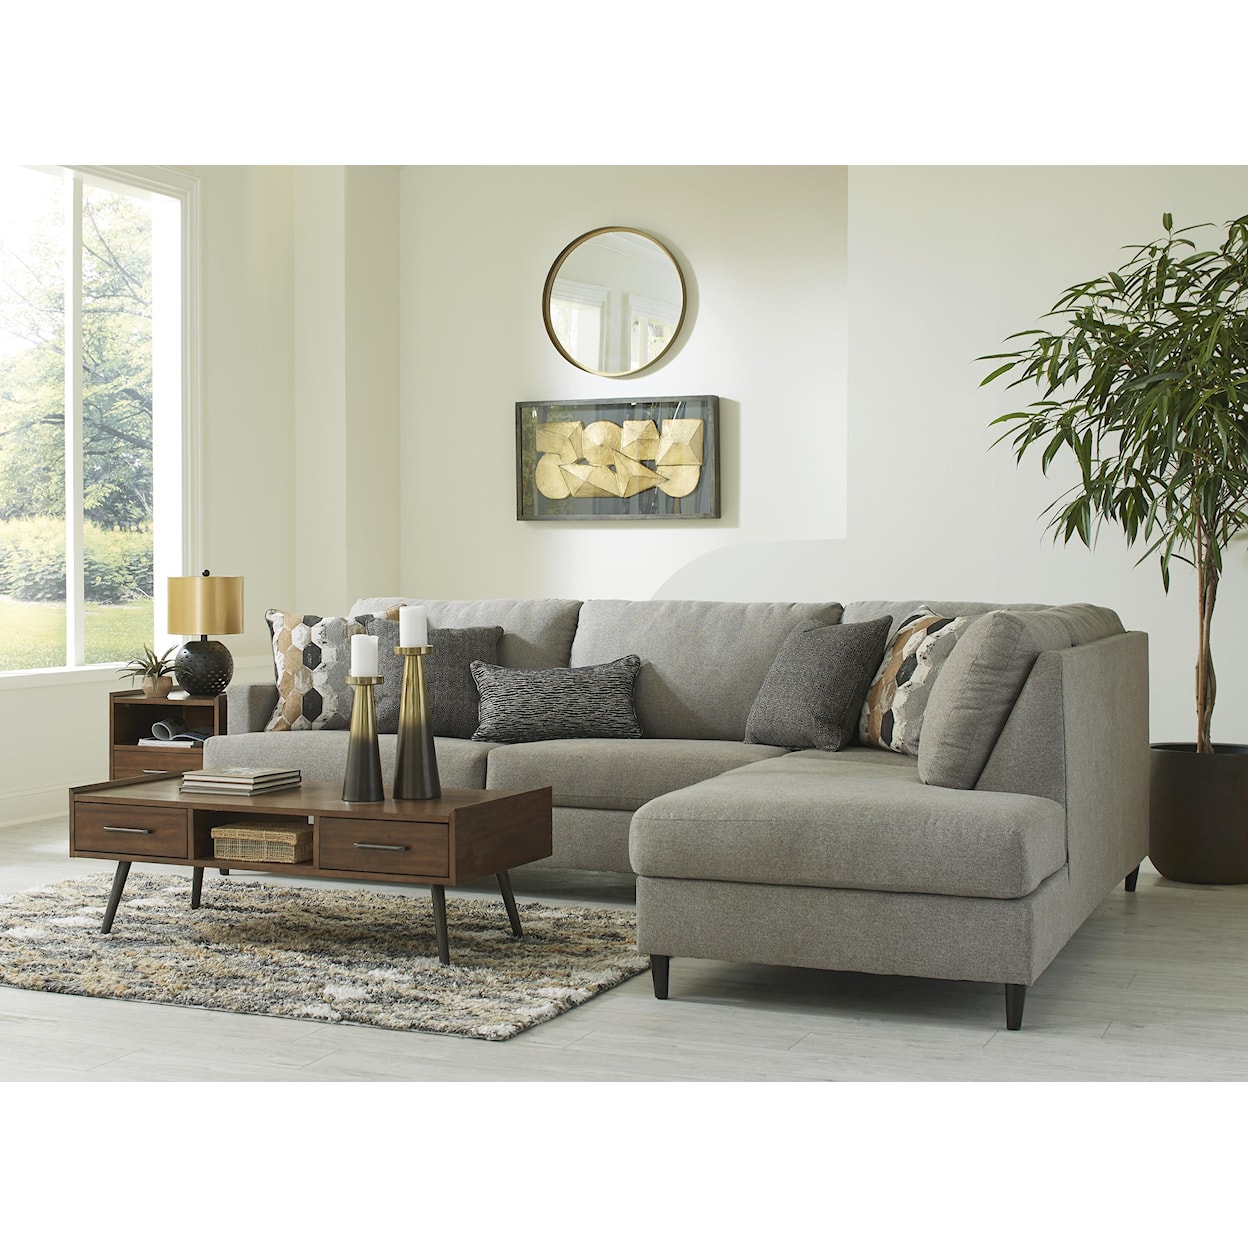 Signature Design by Ashley Santasia 2-Piece Sectional with Chaise